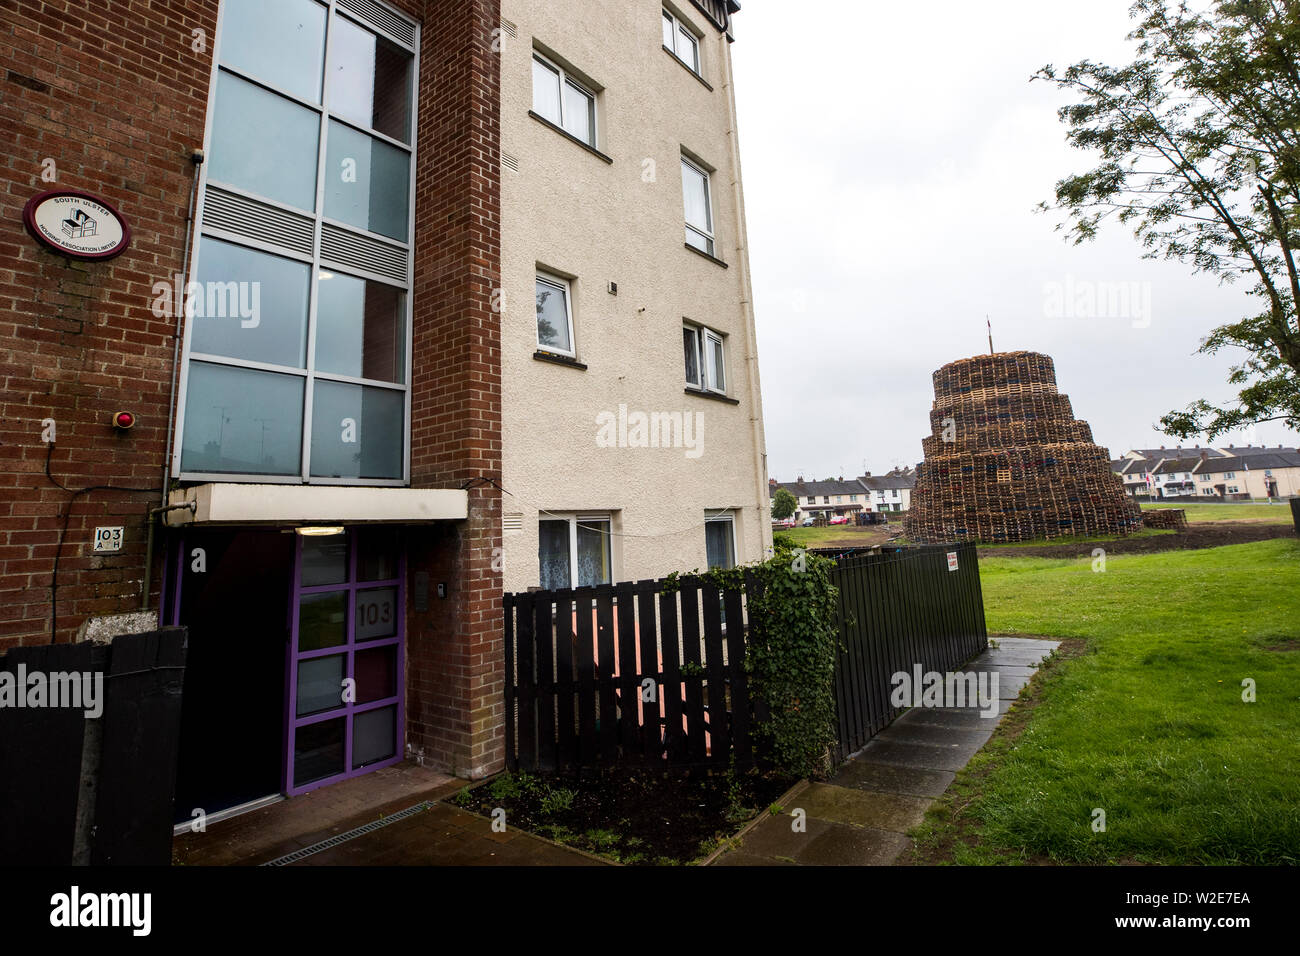 Loyalists in the Redmanville area of Portadown continue to build their traditional 11th night bonfire as part of the 12th of July celebrations. Residents in nearby flats received a letter from the South Ulster Housing Association (SUHA) advising them that the bonfire poses a serious health and safety risk, with a risk to damage of occupants property, and were offered alternative accommodation for a night in the Armagh City Youth Hostel. Stock Photo